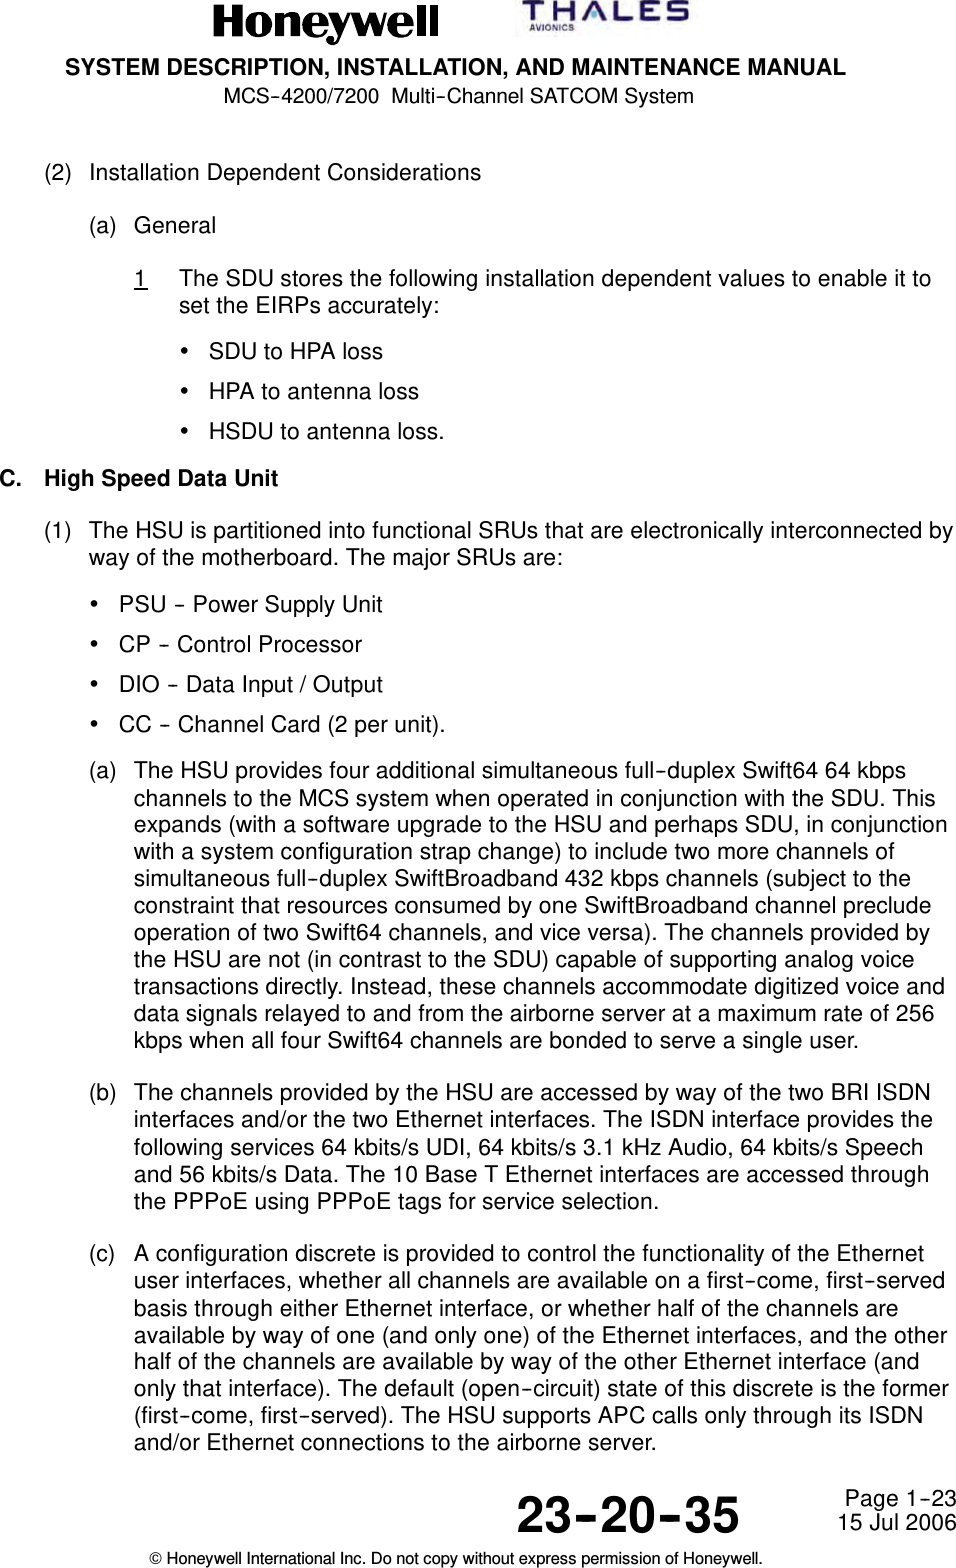 SYSTEM DESCRIPTION, INSTALLATION, AND MAINTENANCE MANUALMCS--4200/7200 Multi--Channel SATCOM System23--20--35 15 Jul 2006Honeywell International Inc. Do not copy without express permission of Honeywell.Page 1--23(2) Installation Dependent Considerations(a) General1The SDU stores the following installation dependent values to enable it toset the EIRPs accurately:•SDU to HPA loss•HPA to antenna loss•HSDU to antenna loss.C. High Speed Data Unit(1) The HSU is partitioned into functional SRUs that are electronically interconnected byway of the motherboard. The major SRUs are:•PSU -- Power Supply Unit•CP -- Control Processor•DIO -- Data Input / Output•CC -- Channel Card (2 per unit).(a) The HSU provides four additional simultaneous full--duplex Swift64 64 kbpschannels to the MCS system when operated in conjunction with the SDU. Thisexpands (with a software upgrade to the HSU and perhaps SDU, in conjunctionwith a system configuration strap change) to include two more channels ofsimultaneous full--duplex SwiftBroadband 432 kbps channels (subject to theconstraint that resources consumed by one SwiftBroadband channel precludeoperation of two Swift64 channels, and vice versa). The channels provided bythe HSU are not (in contrast to the SDU) capable of supporting analog voicetransactions directly. Instead, these channels accommodate digitized voice anddata signals relayed to and from the airborne server at a maximum rate of 256kbps when all four Swift64 channels are bonded to serve a single user.(b) The channels provided by the HSU are accessed by way of the two BRI ISDNinterfaces and/or the two Ethernet interfaces. The ISDN interface provides thefollowing services 64 kbits/s UDI, 64 kbits/s 3.1 kHz Audio, 64 kbits/s Speechand 56 kbits/s Data. The 10 Base T Ethernet interfaces are accessed throughthe PPPoE using PPPoE tags for service selection.(c) A configuration discrete is provided to control the functionality of the Ethernetuser interfaces, whether all channels are available on a first--come, first--servedbasis through either Ethernet interface, or whether half of the channels areavailable by way of one (and only one) of the Ethernet interfaces, and the otherhalf of the channels are available by way of the other Ethernet interface (andonly that interface). The default (open--circuit) state of this discrete is the former(first--come, first--served). The HSU supports APC calls only through its ISDNand/or Ethernet connections to the airborne server.